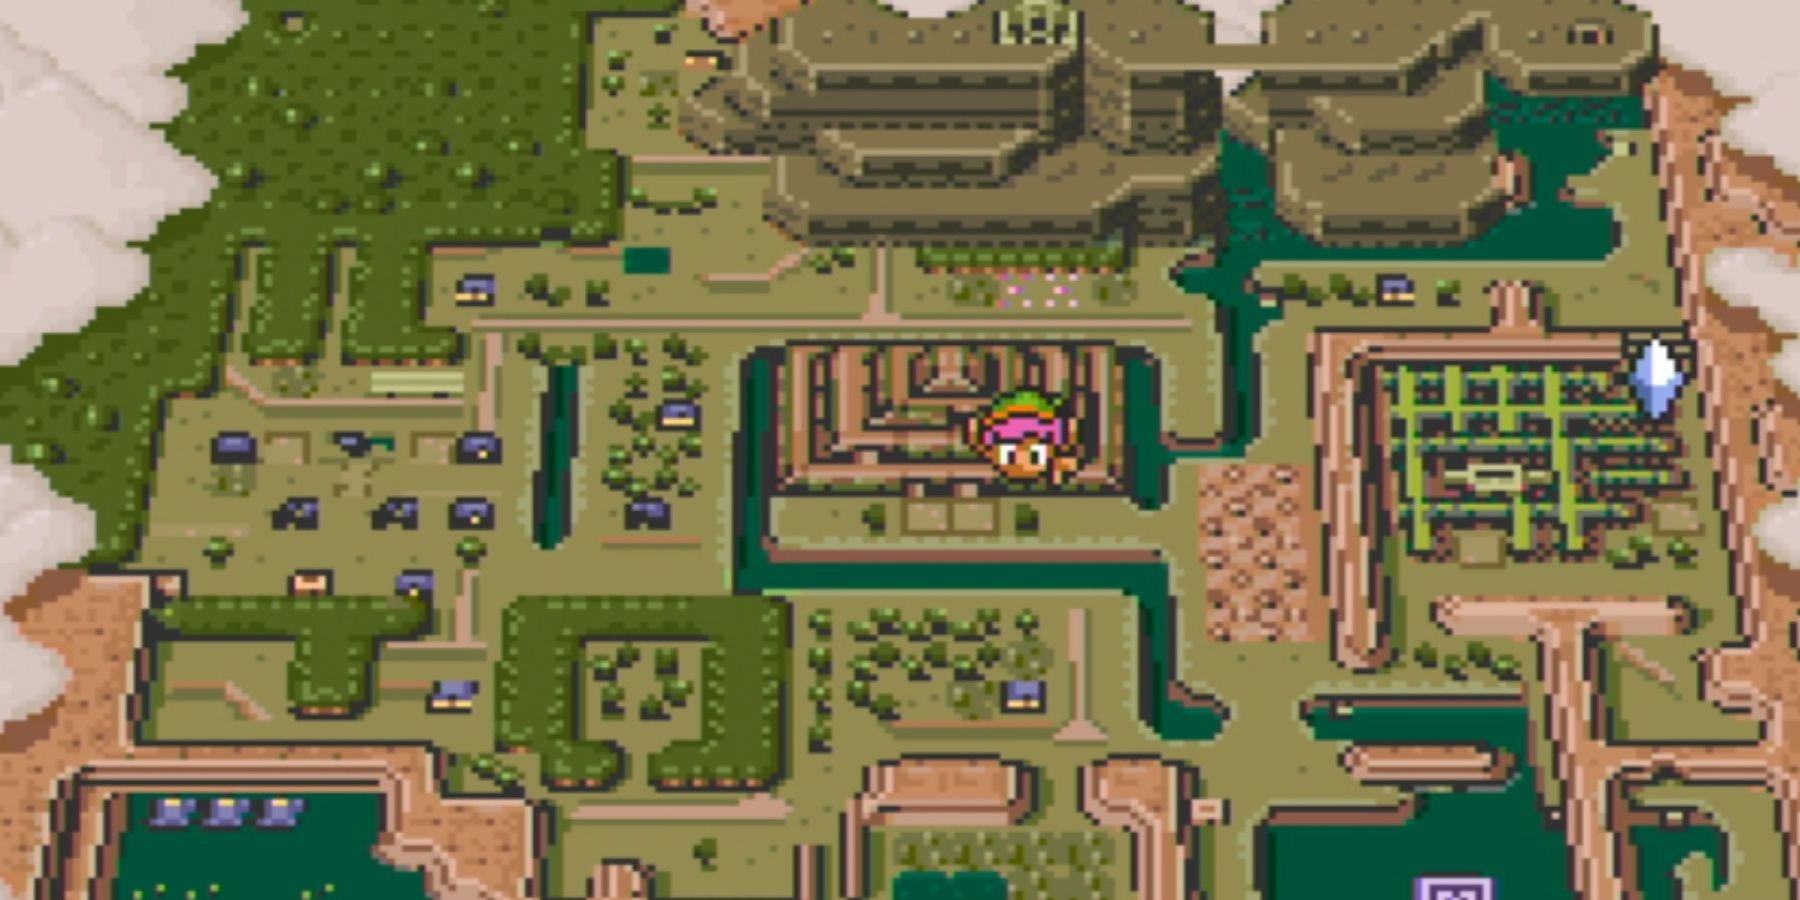 the overworld map showing the rough location of the palace 